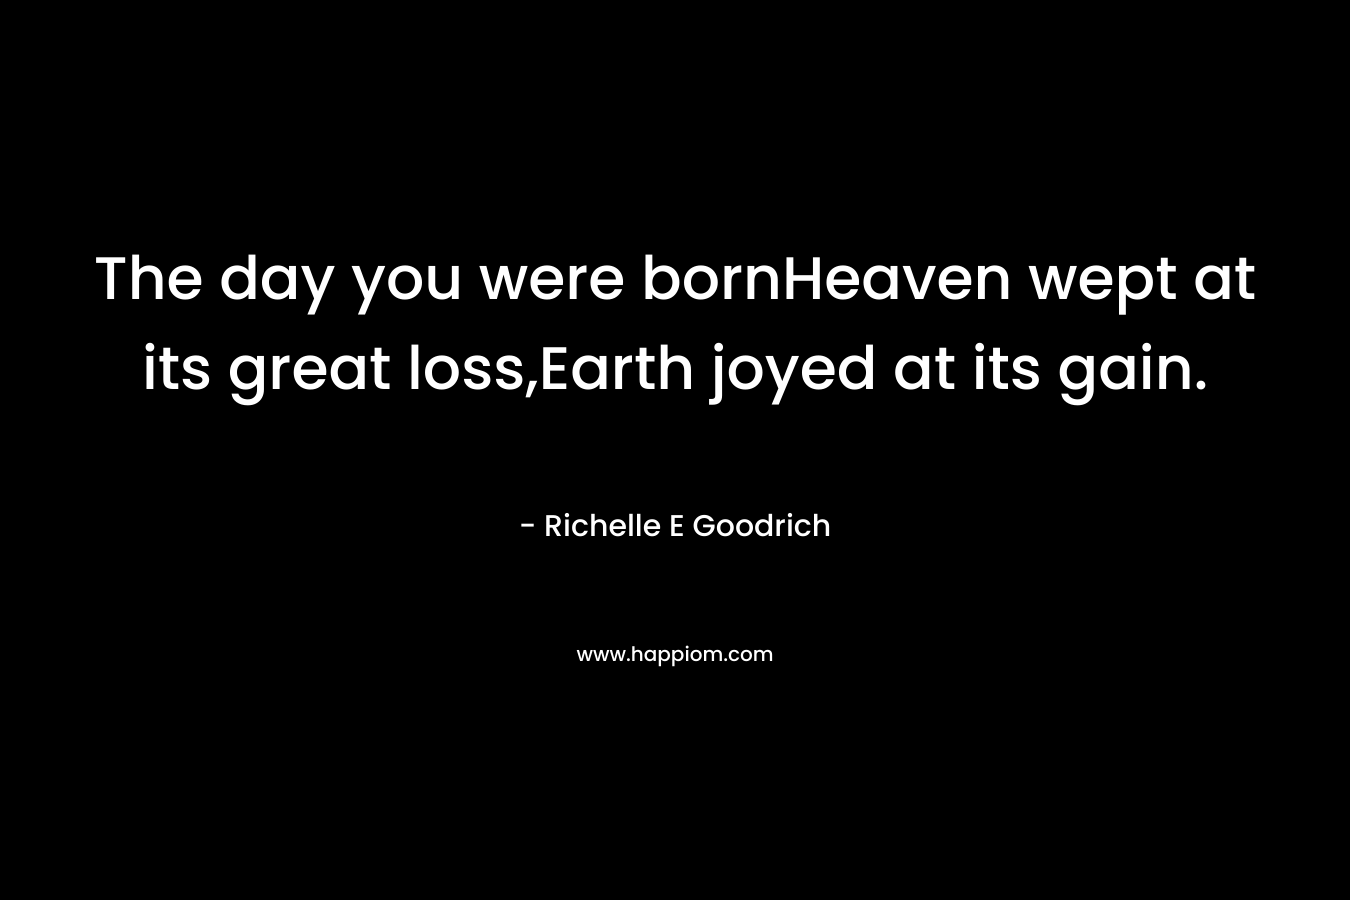 The day you were bornHeaven wept at its great loss,Earth joyed at its gain.